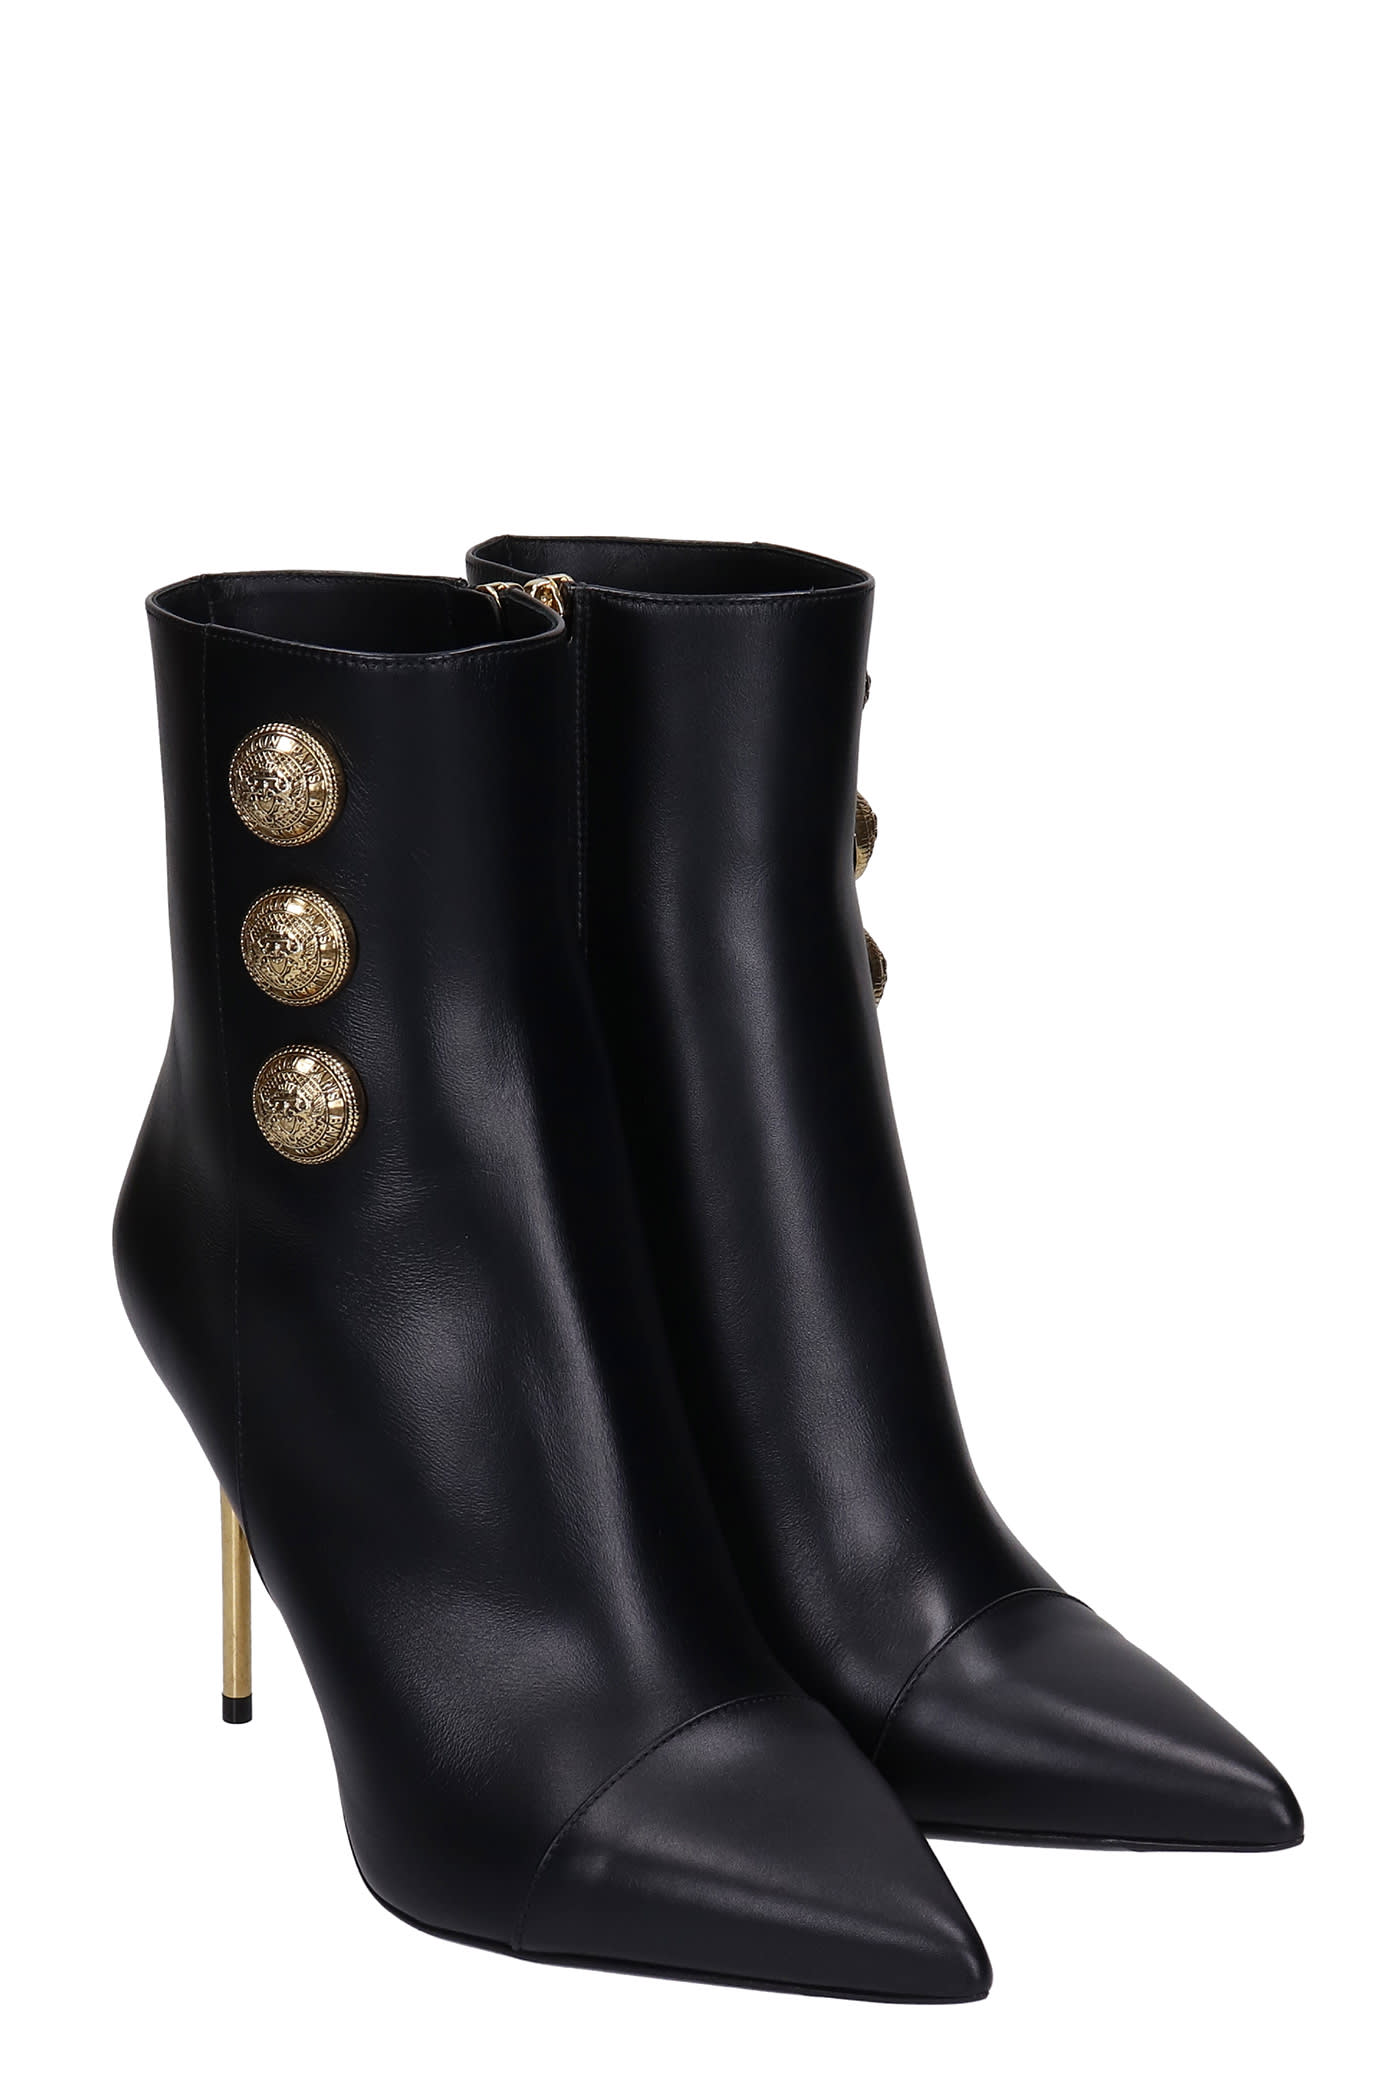 Balmain Roni High Heels Ankle Boots In Black Leather